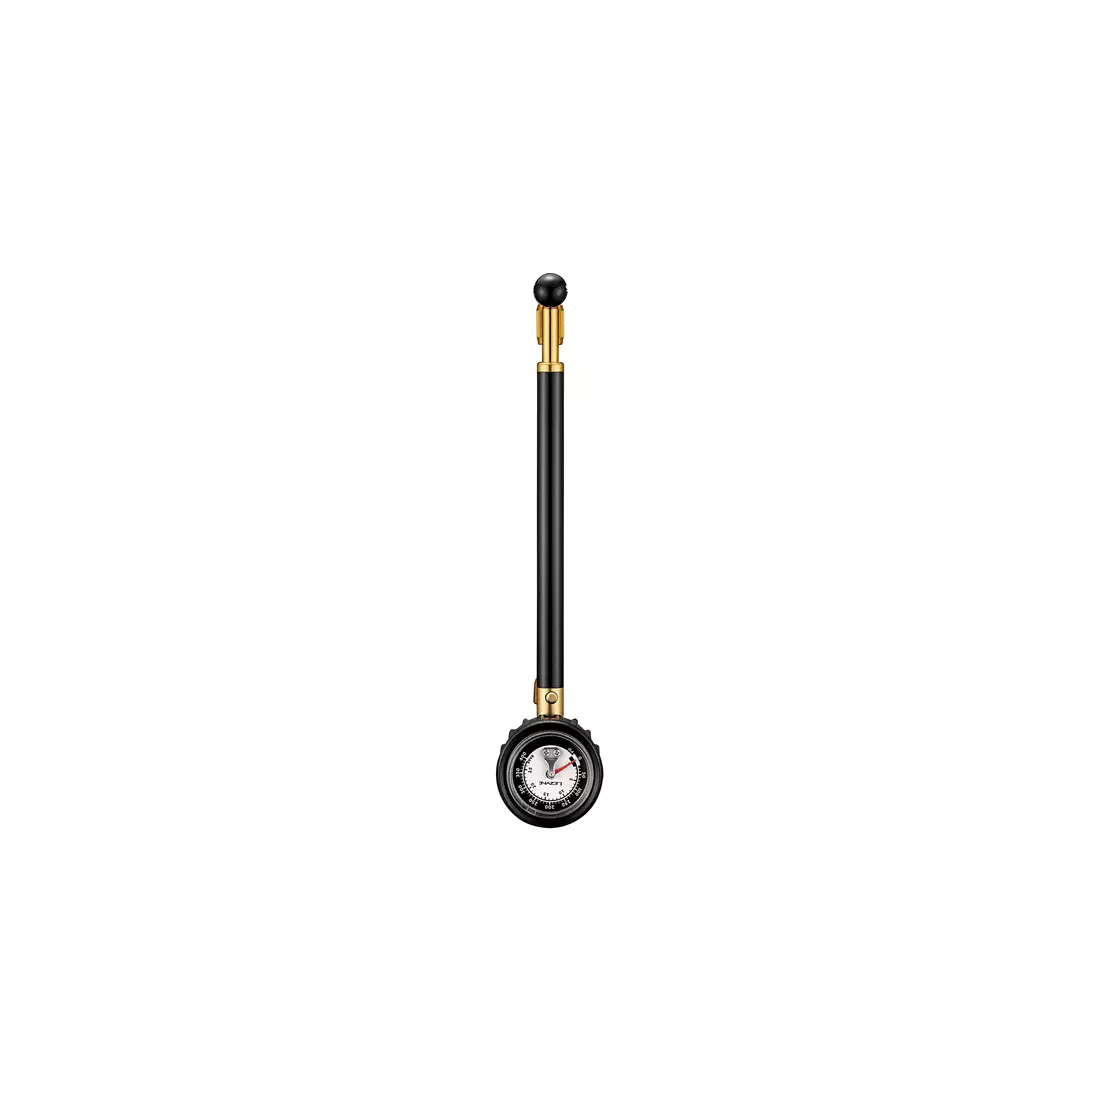 LEZYNE hand pump for shock absorbers with manometer shock drive 400psi black-gold LZN-1-MP-SHKDR-V204